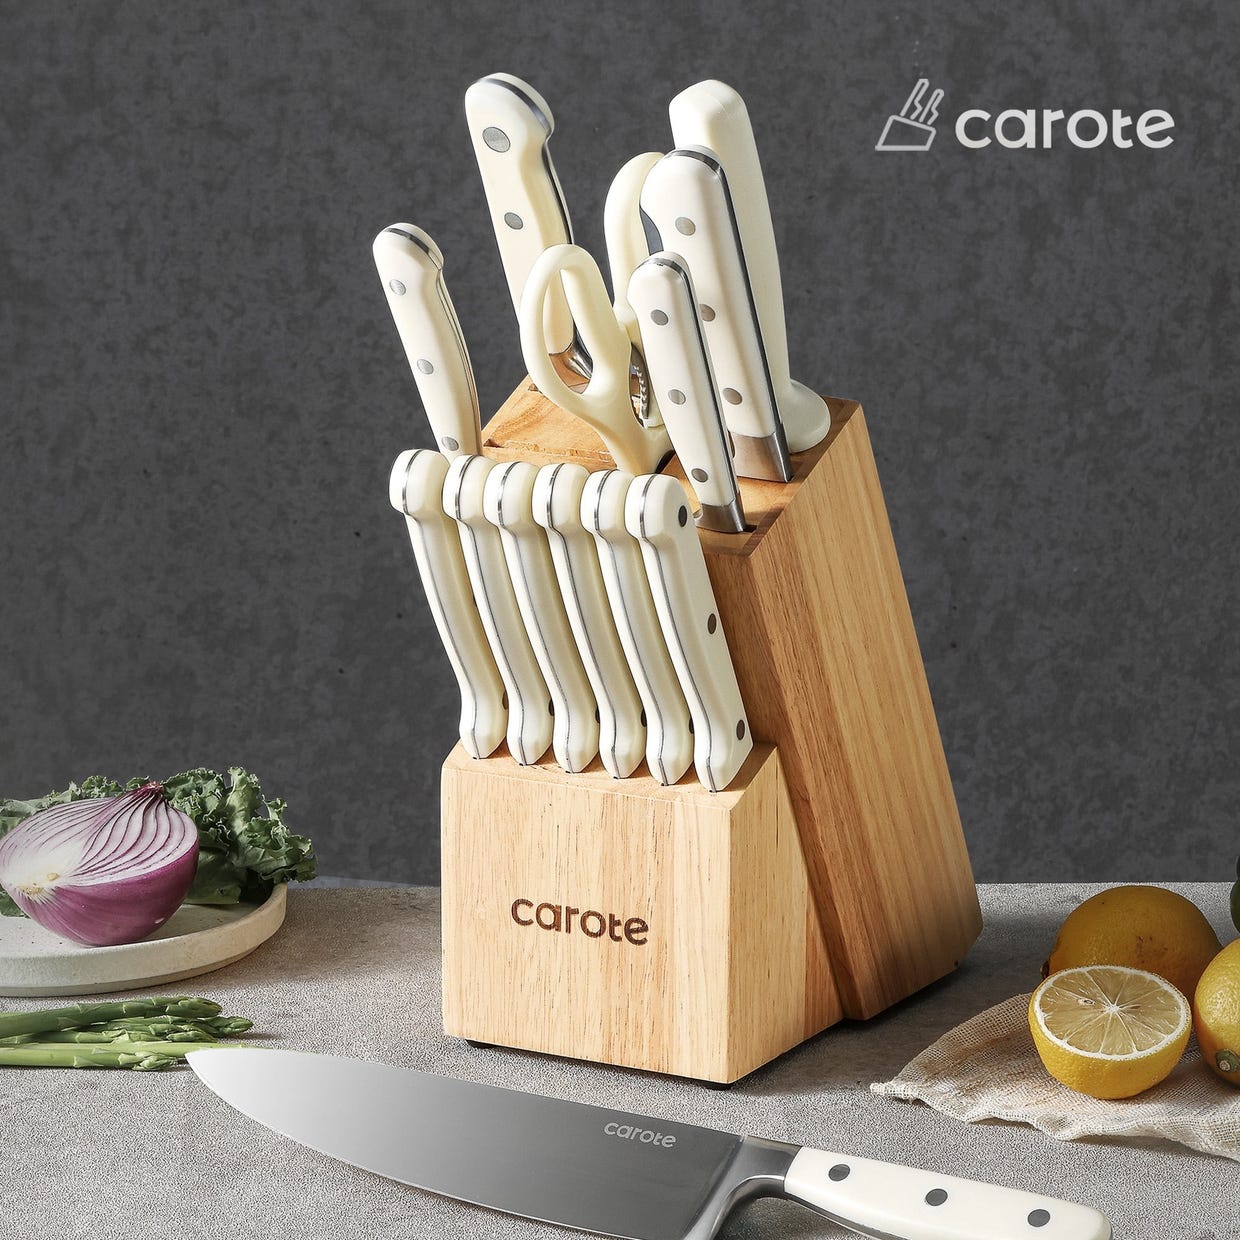 A set of kitchen knives with ivory-colored handles in a wooden block, alongside fresh vegetables and a lemon.